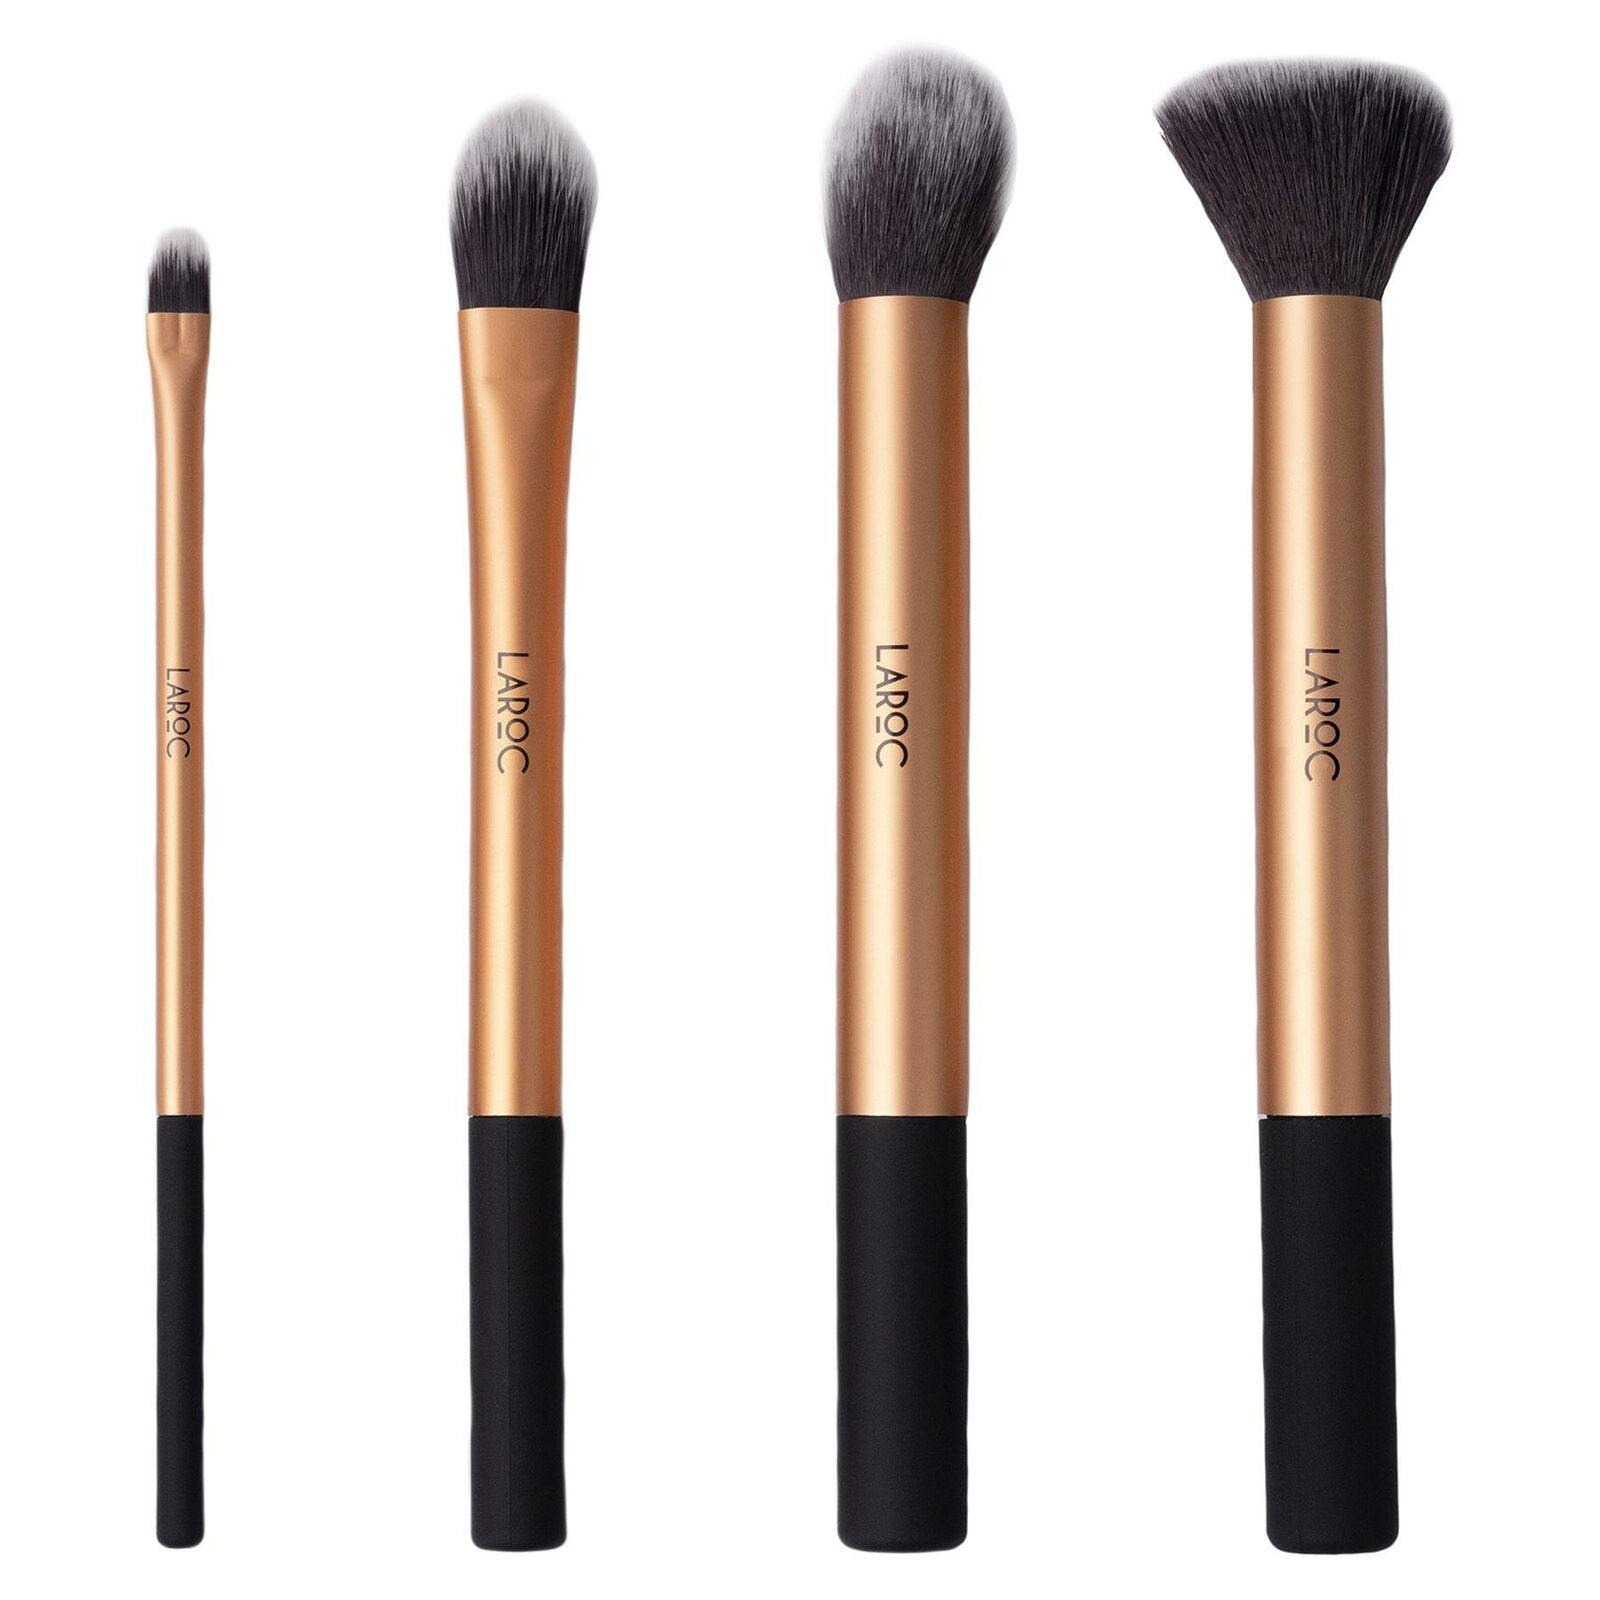 LaRoc 4pcs Premium Black Gold Makeup Brush Cosmetic Set with Case - Home Inspired Gifts